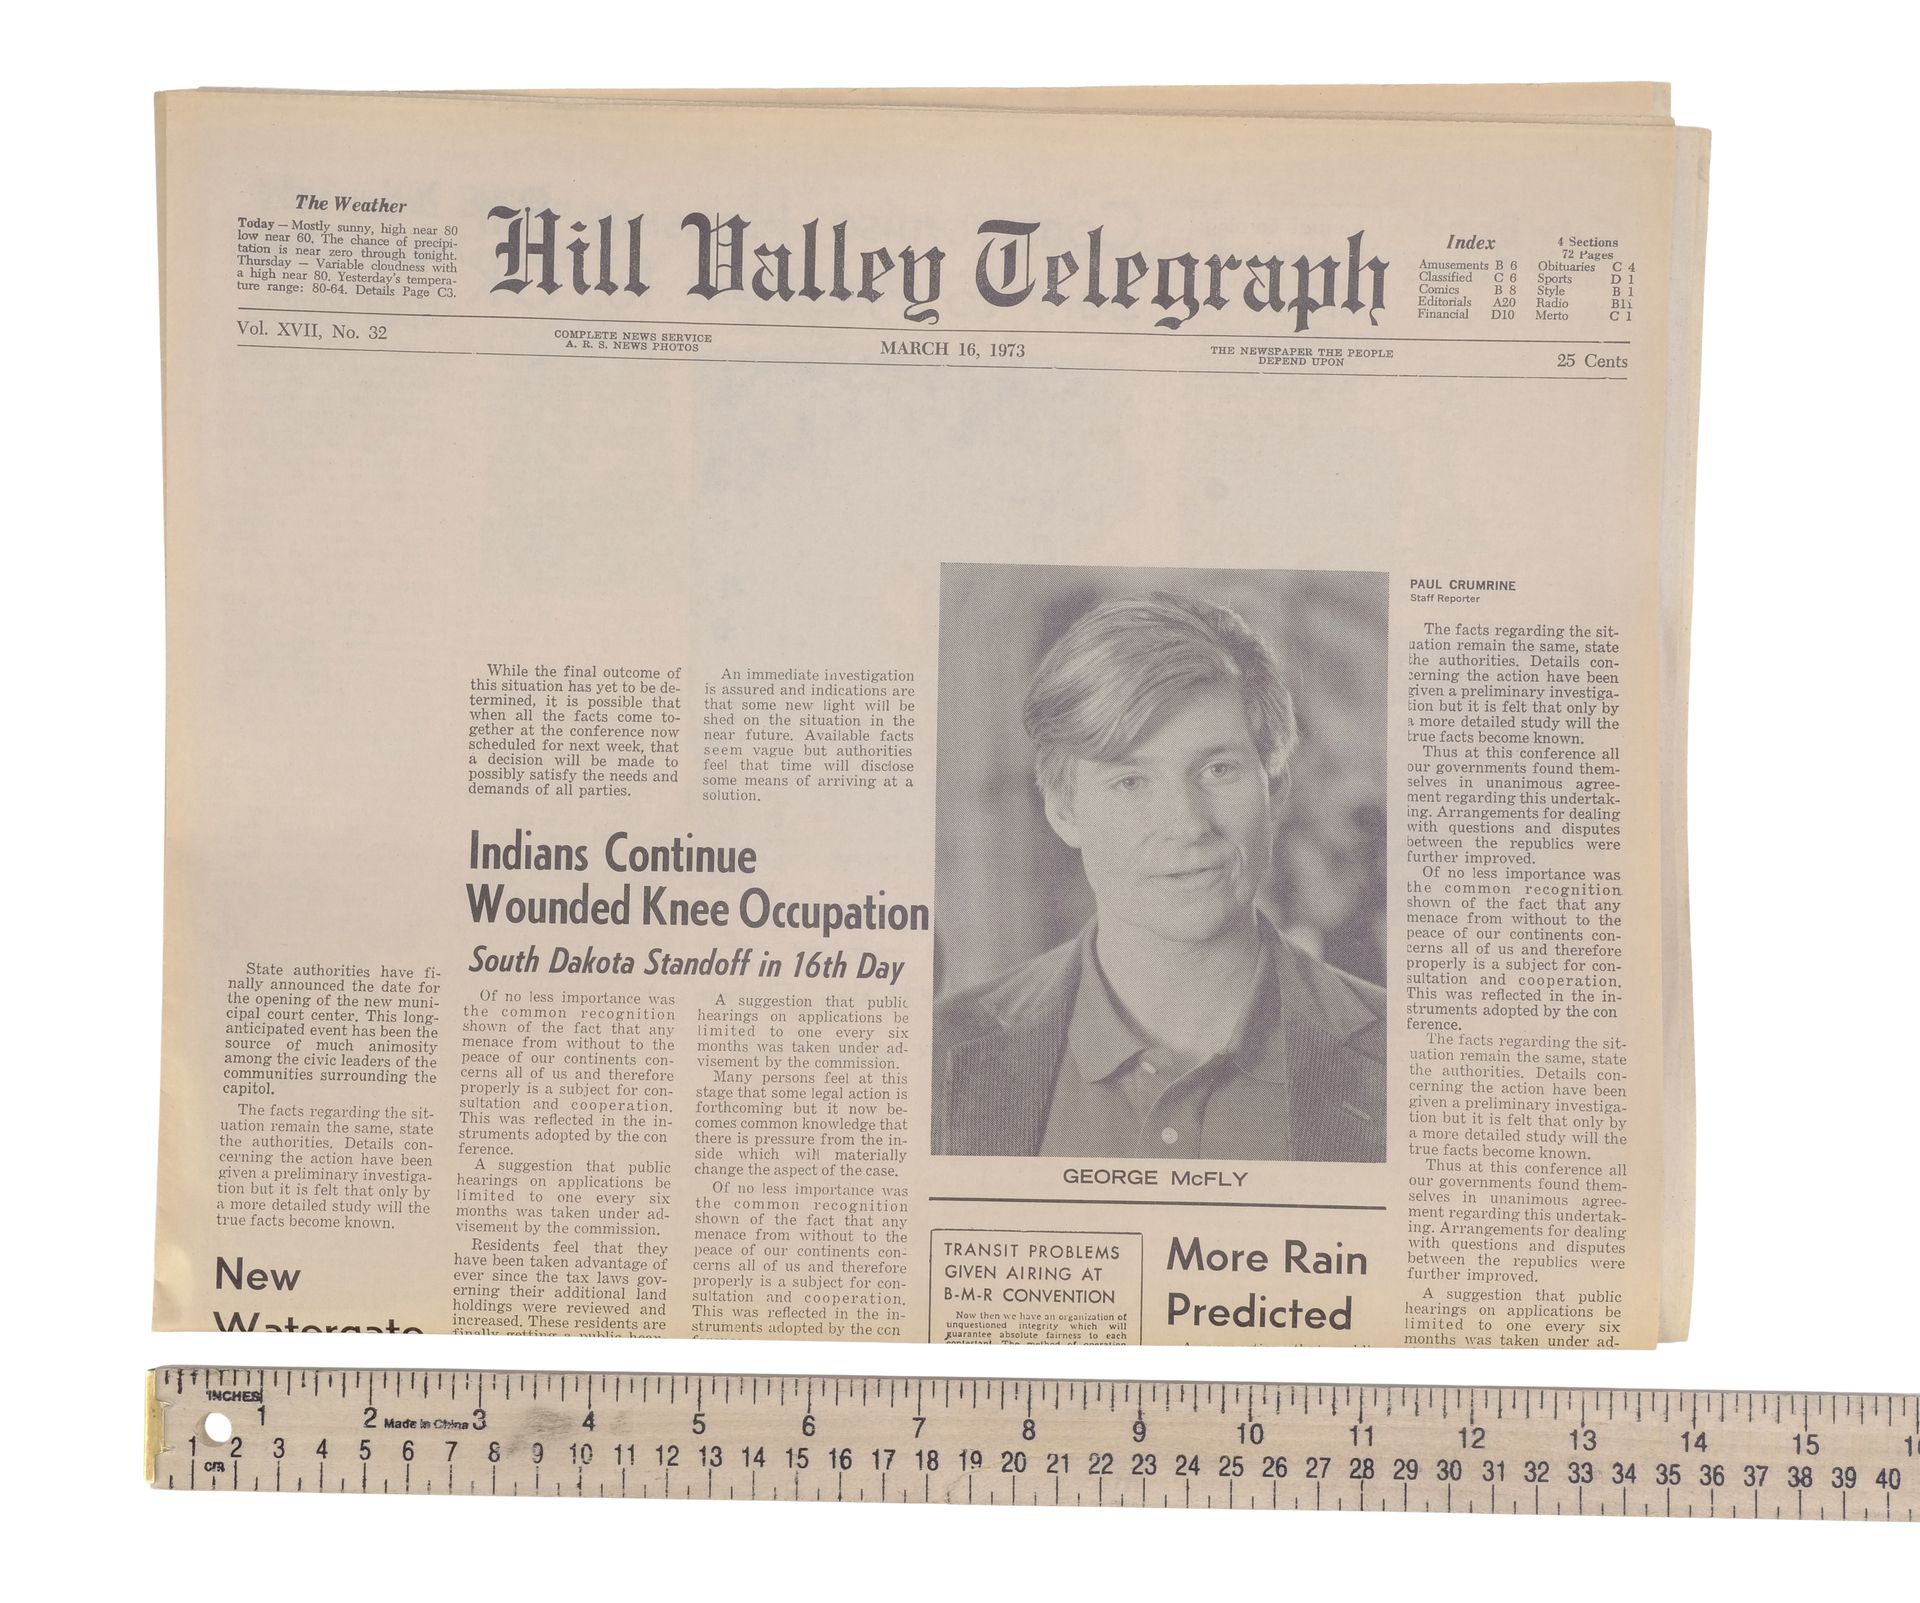 BACK TO THE FUTURE PART II (1989) - "George McFly Murdered/Honored" SFX Hill Valley Telegraph Newspa - Image 4 of 4